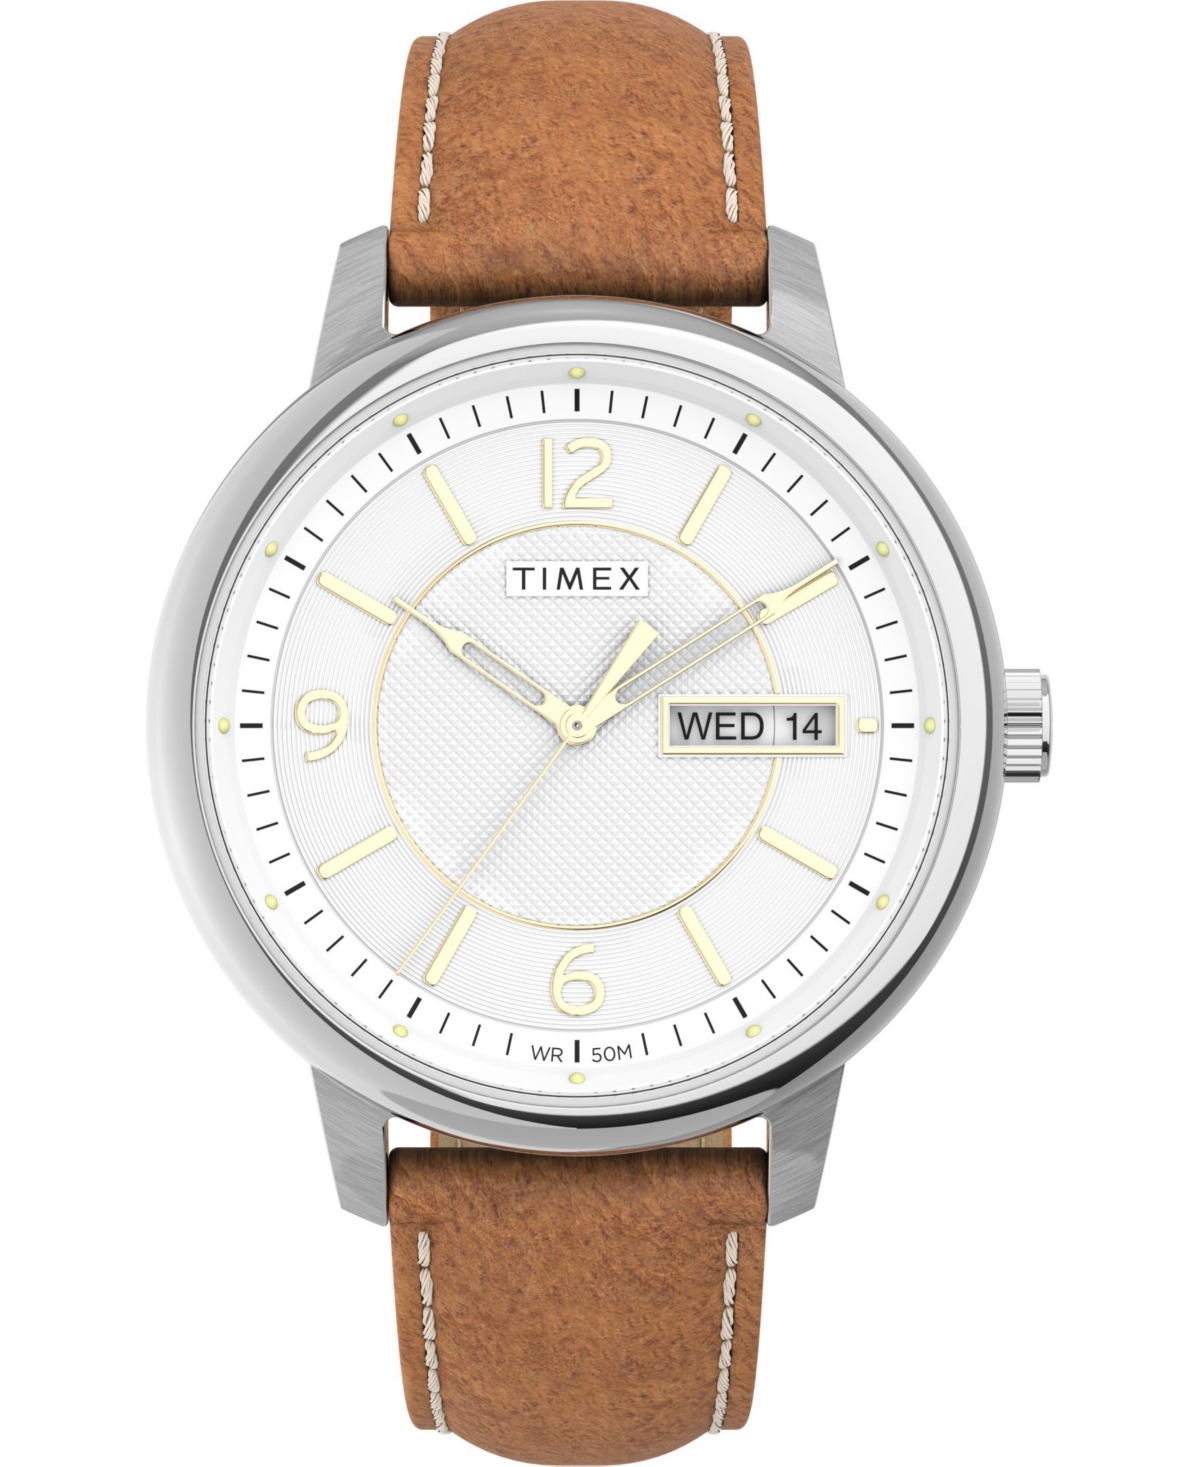 TIMEX MEN'S CHICAGO TAN LEATHER WATCH 45MM